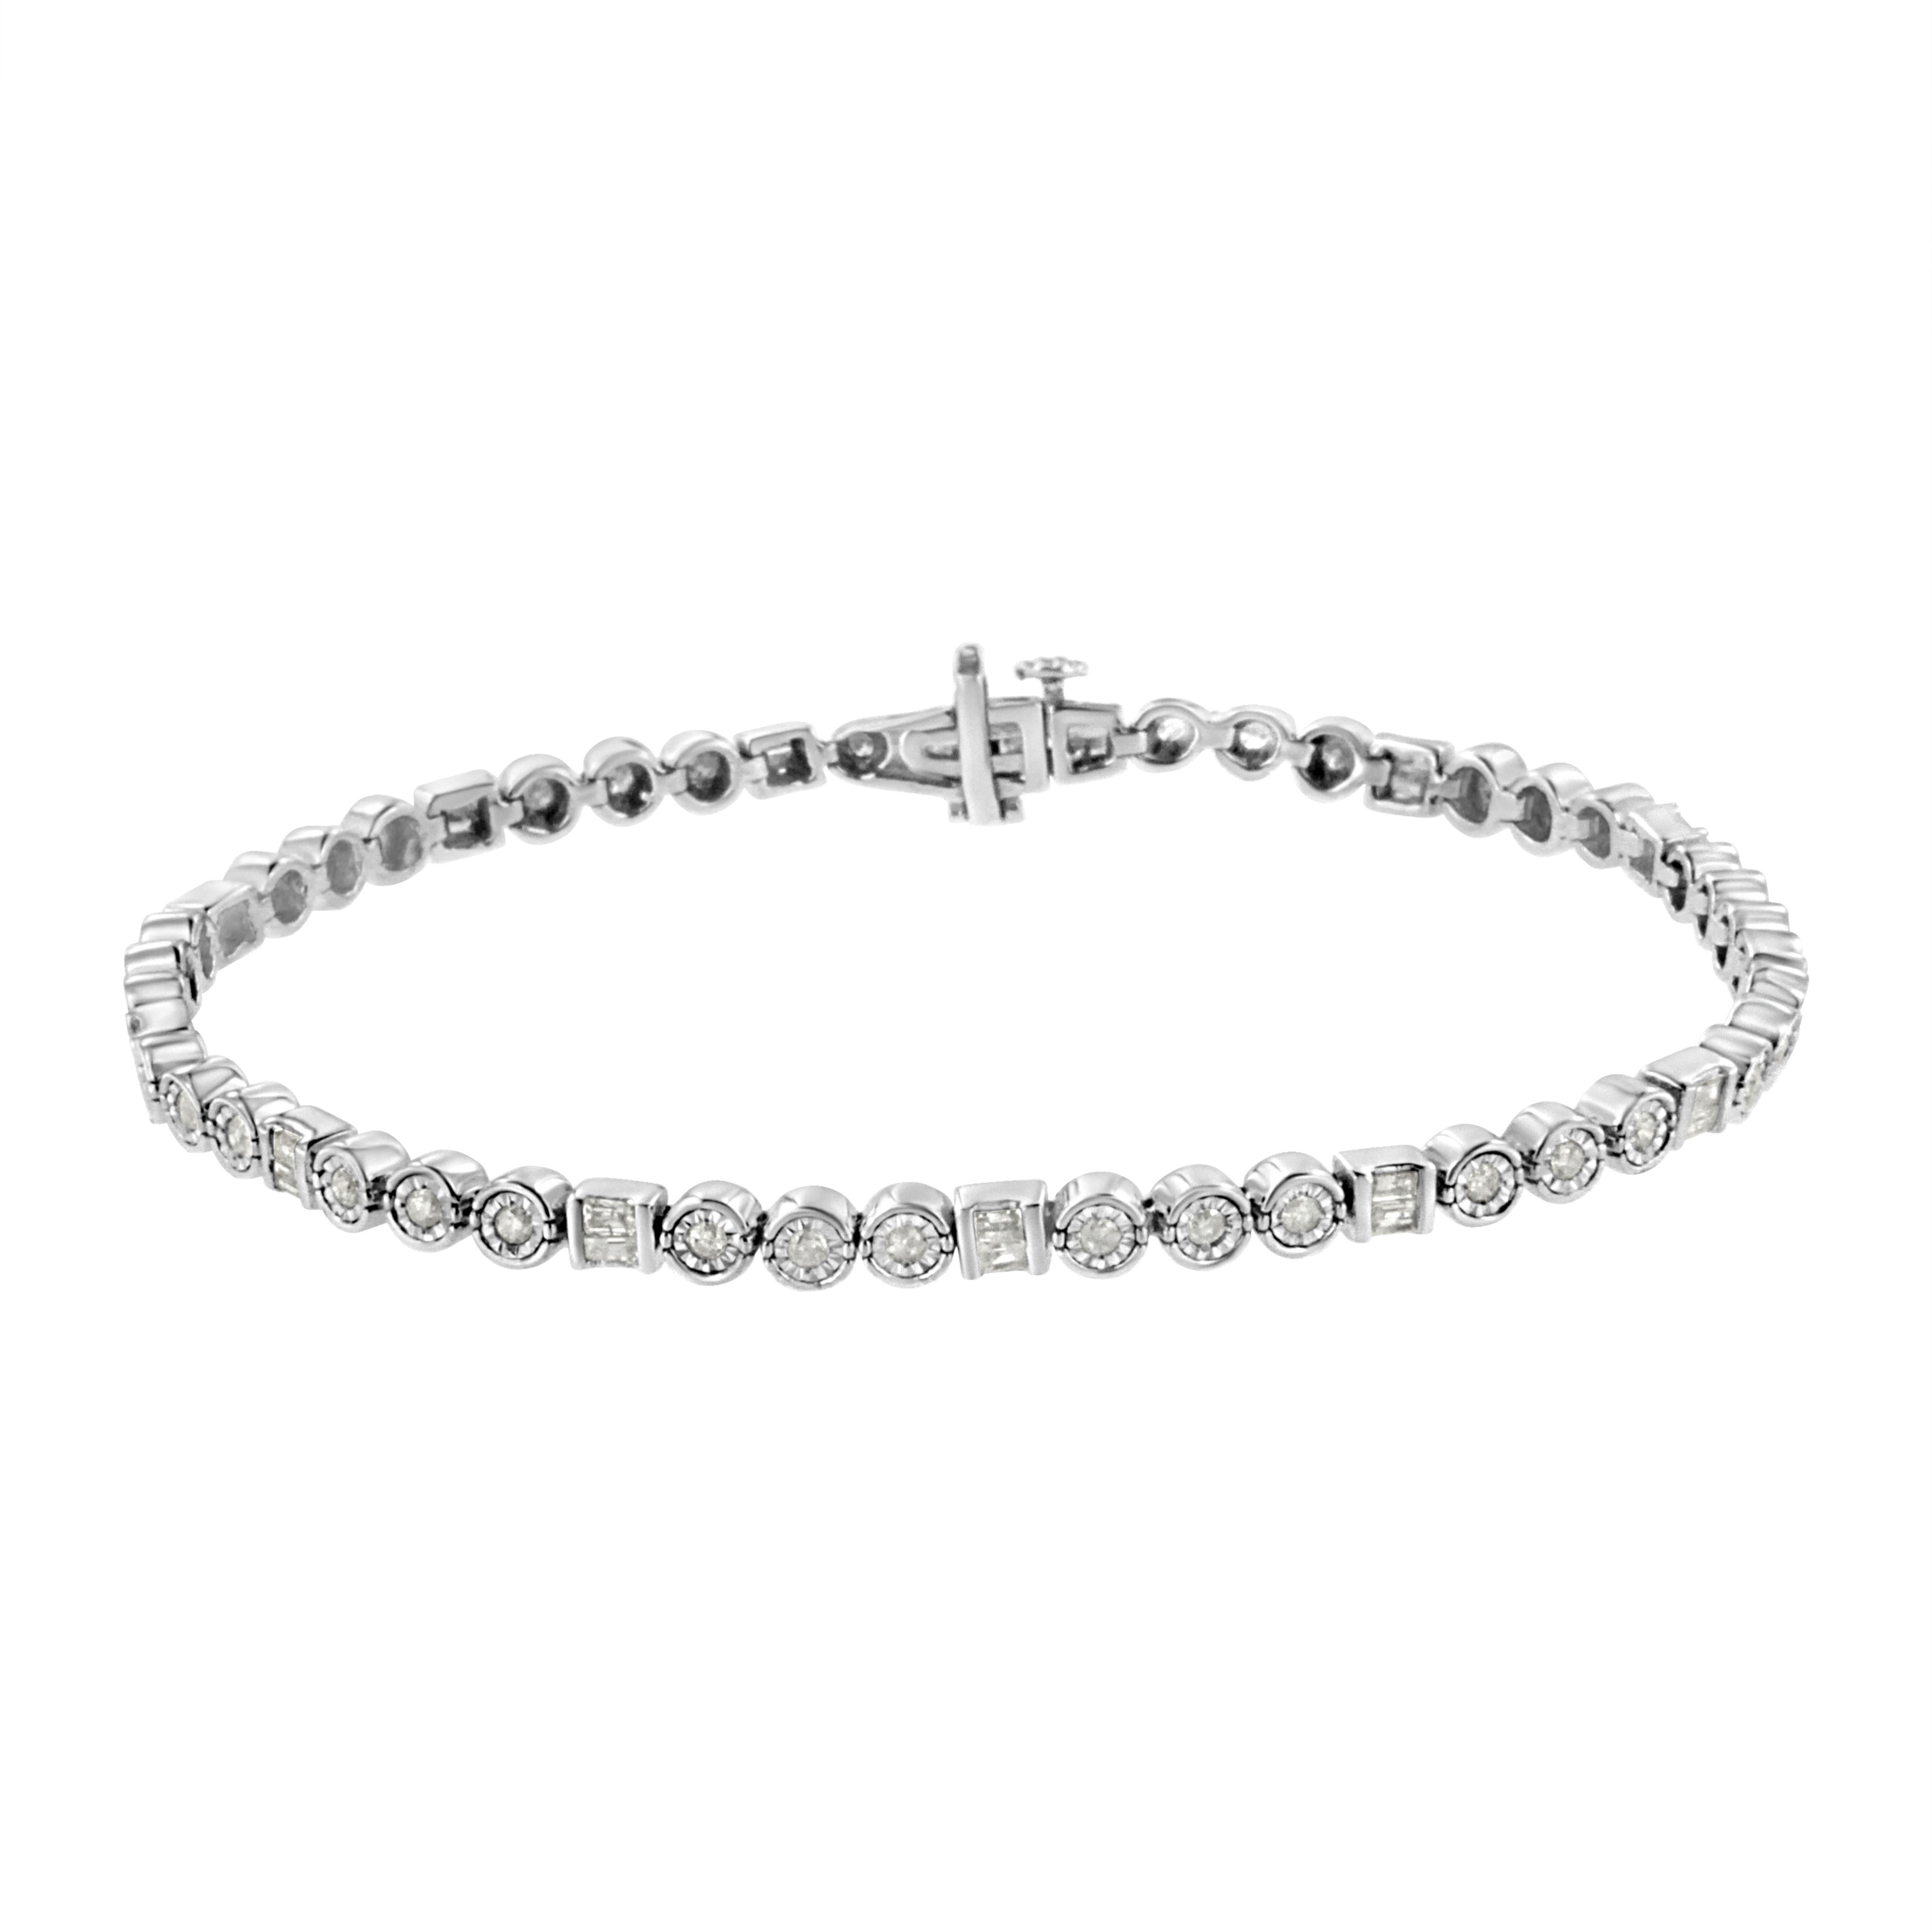 This unique diamond link bracelet has a dazzling alternating design of 3 round sterling silver links embellished with round-cut diamonds alternating with 1 sterling silver channel set with baguette-cut diamonds. This beautiful piece is set with a